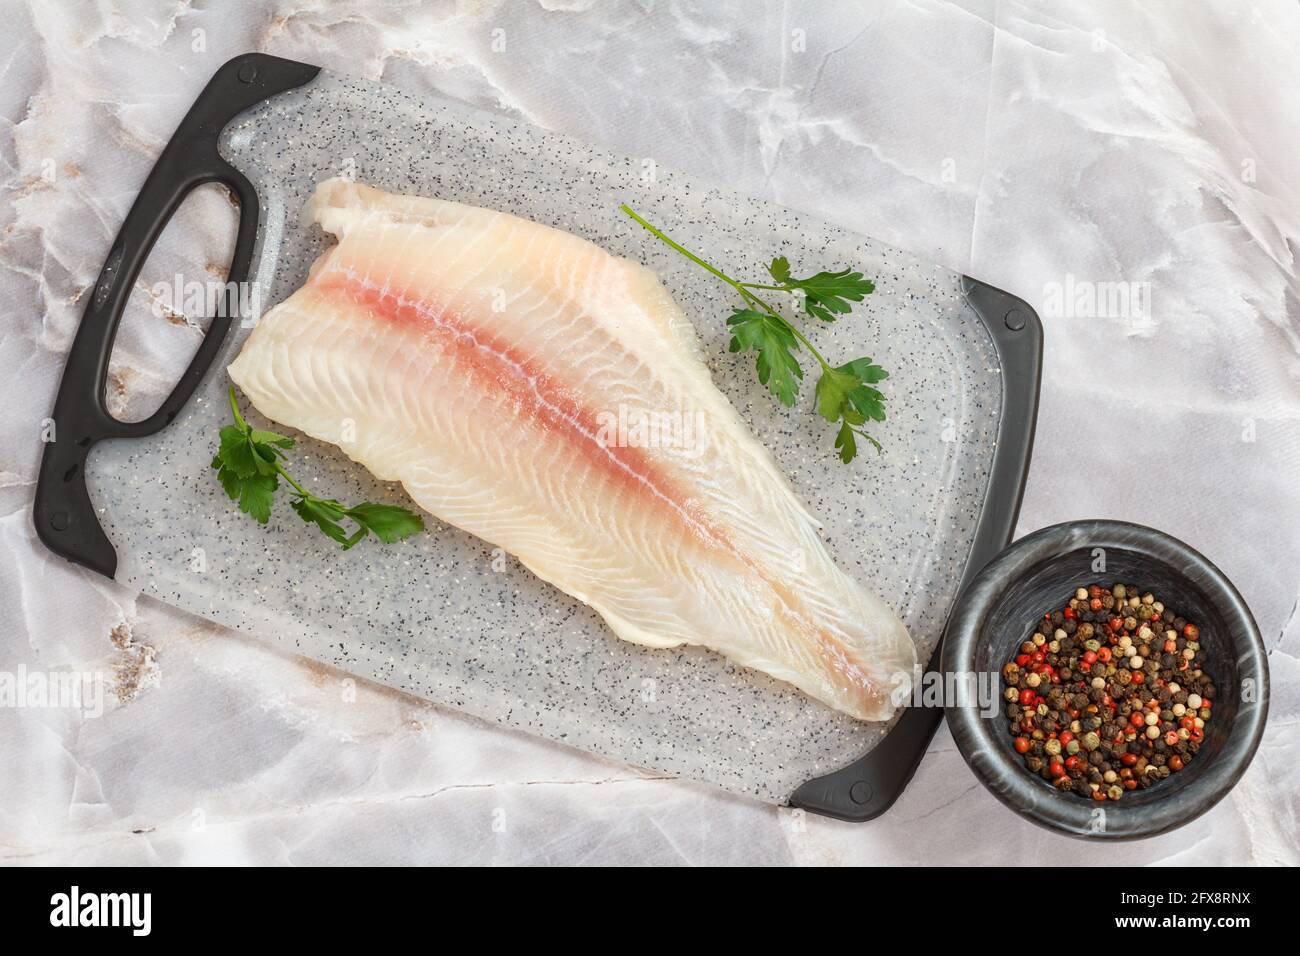 Fillet of raw pangasius fish with spices on cutting board Stock Photo